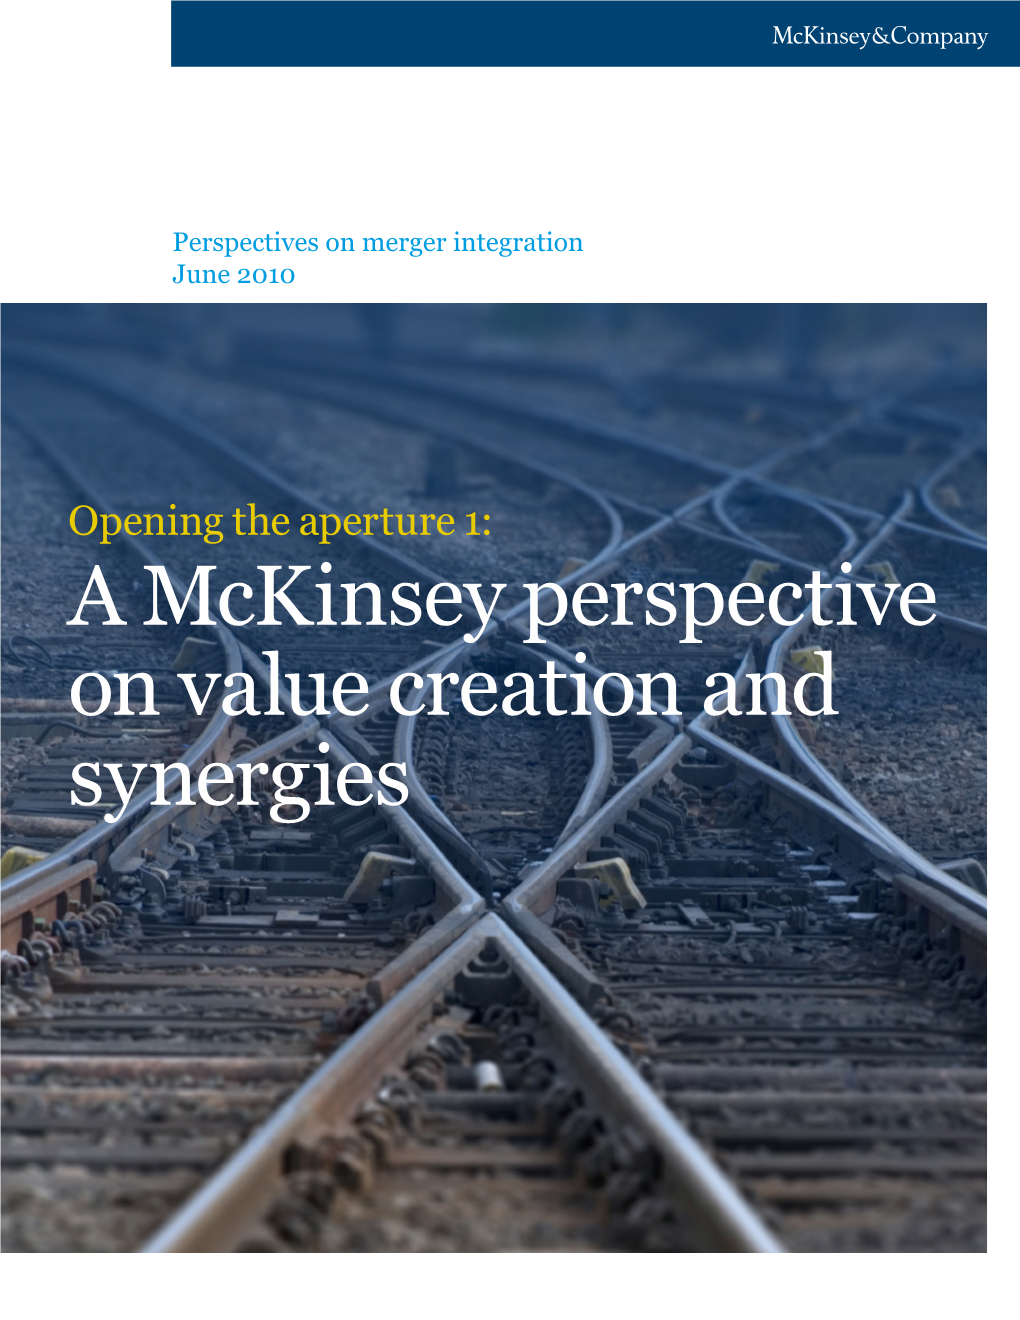 A Mckinsey Perspective on Value Creation and Synergies